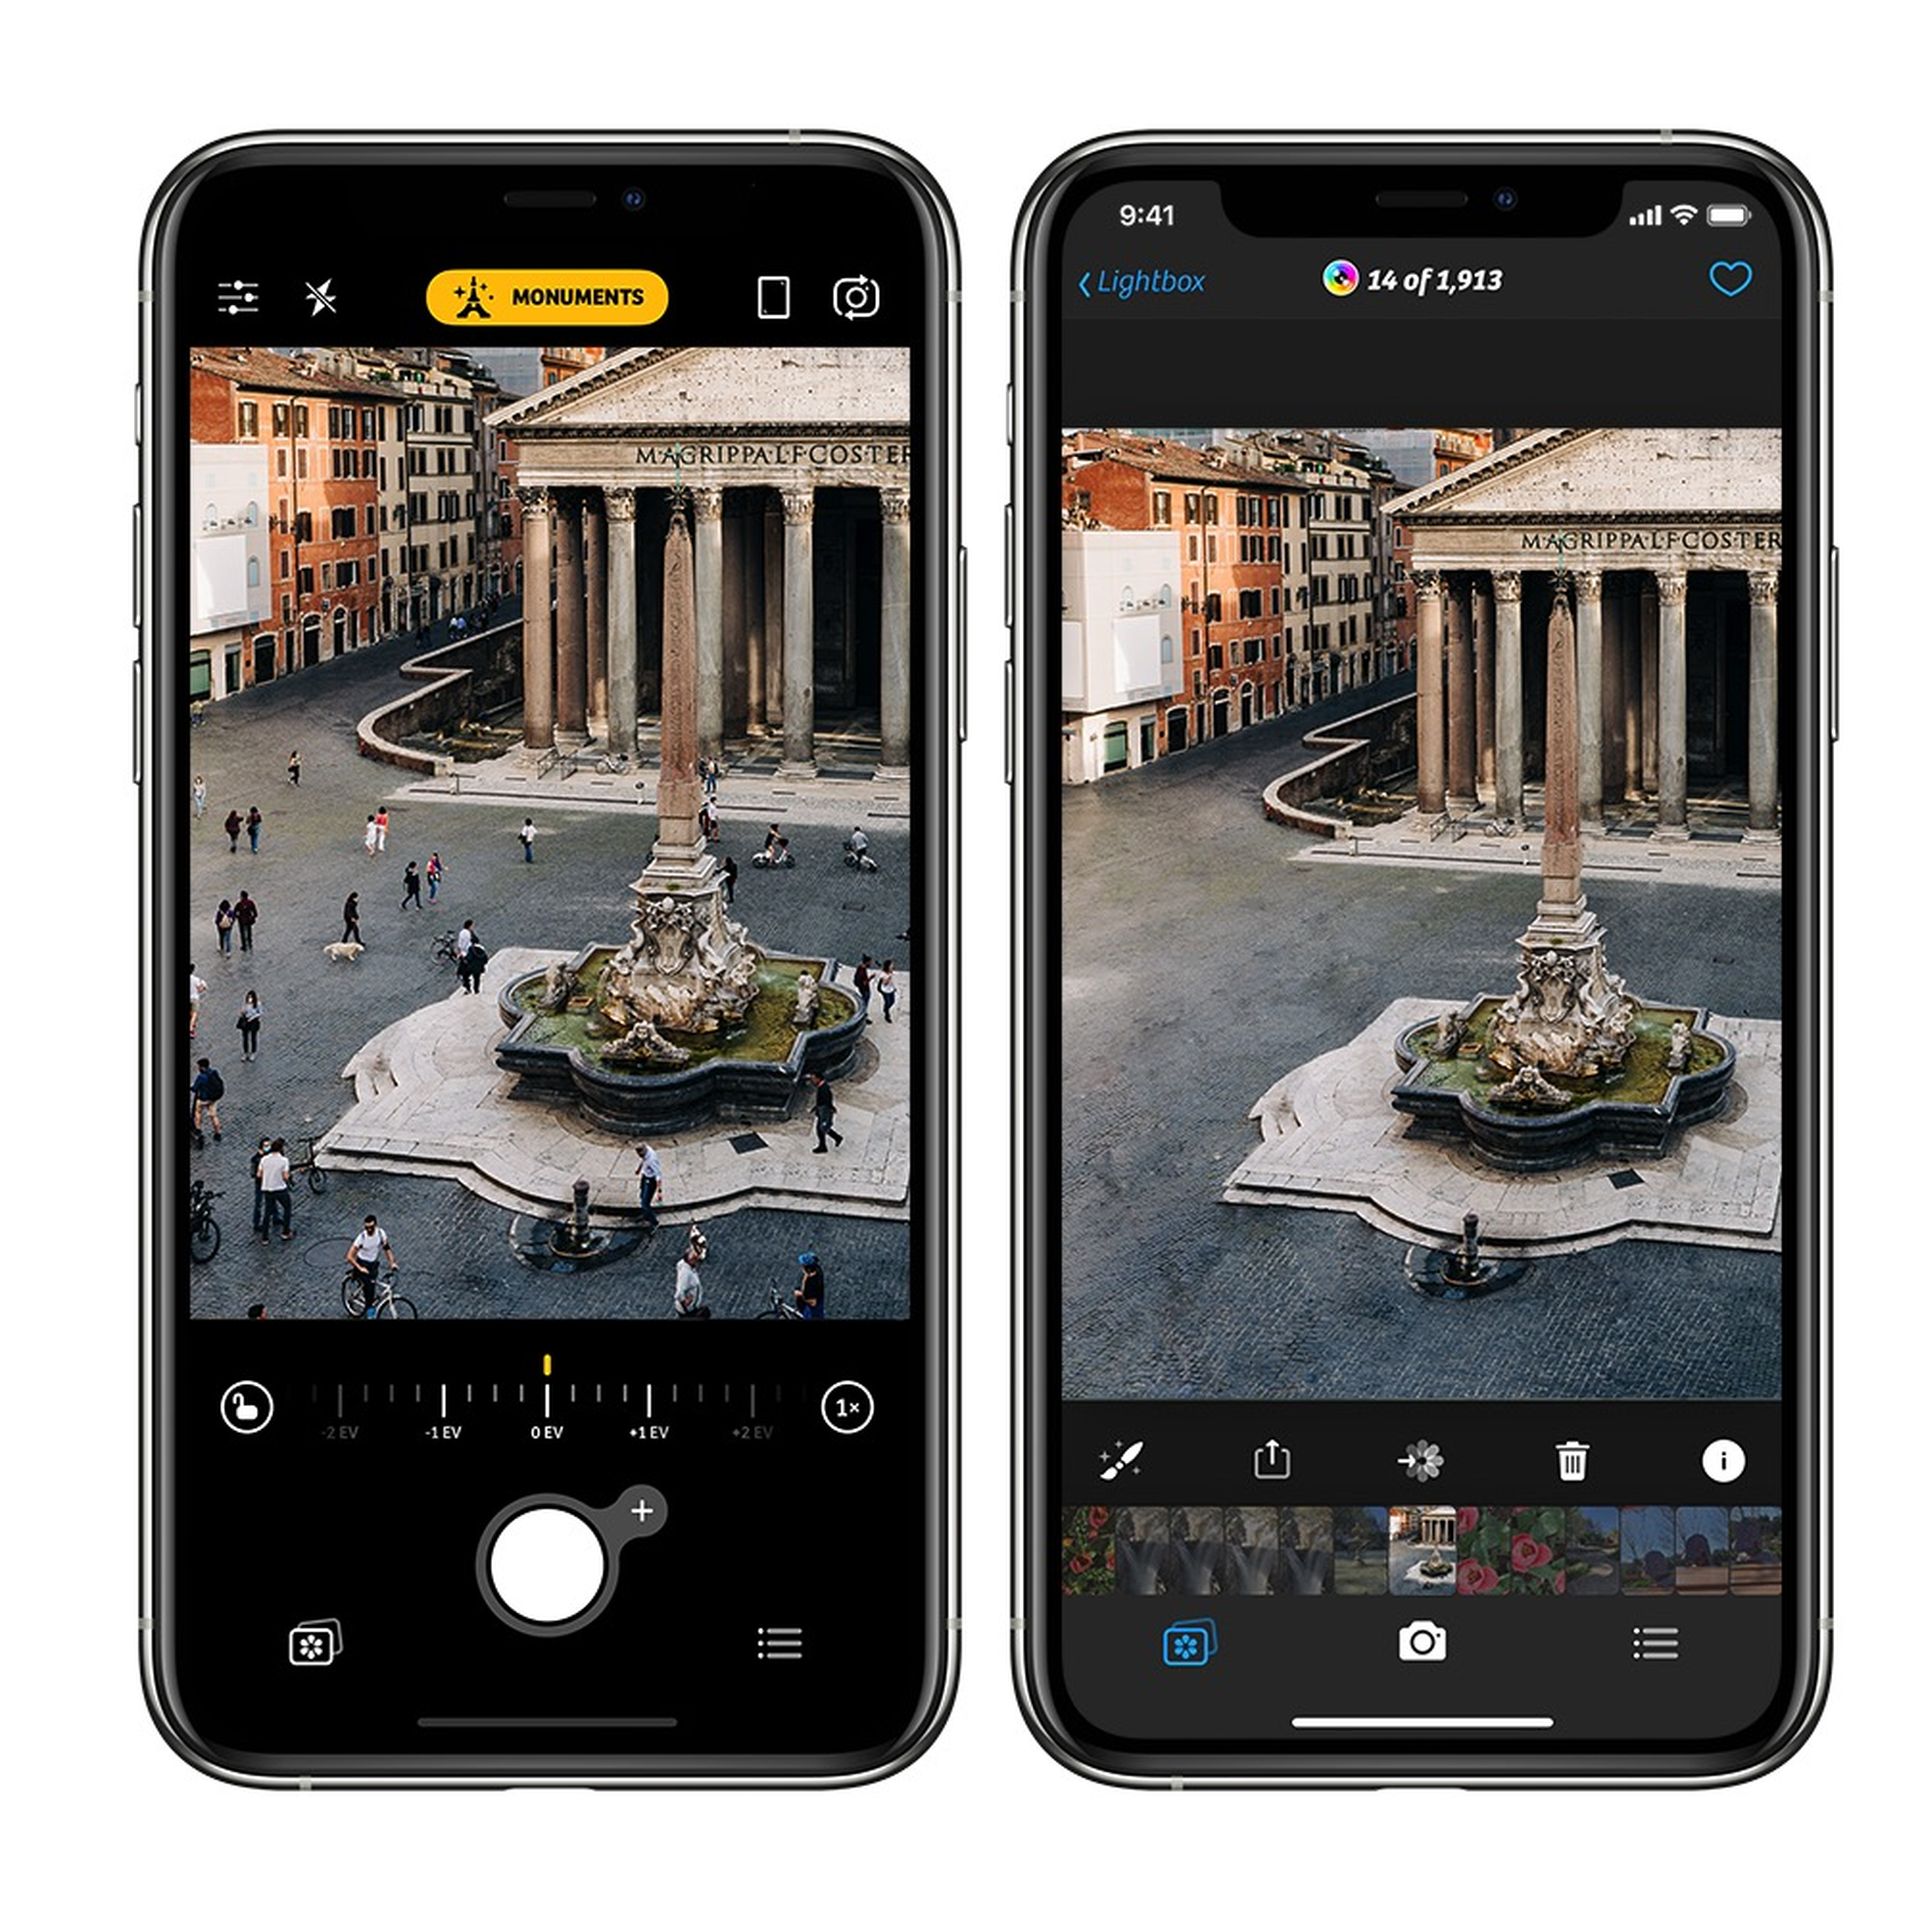 In this article, we are going to be covering the new update for Camera+ 2, allowing users to use the upscale feature that can take photos up to 48 MP.